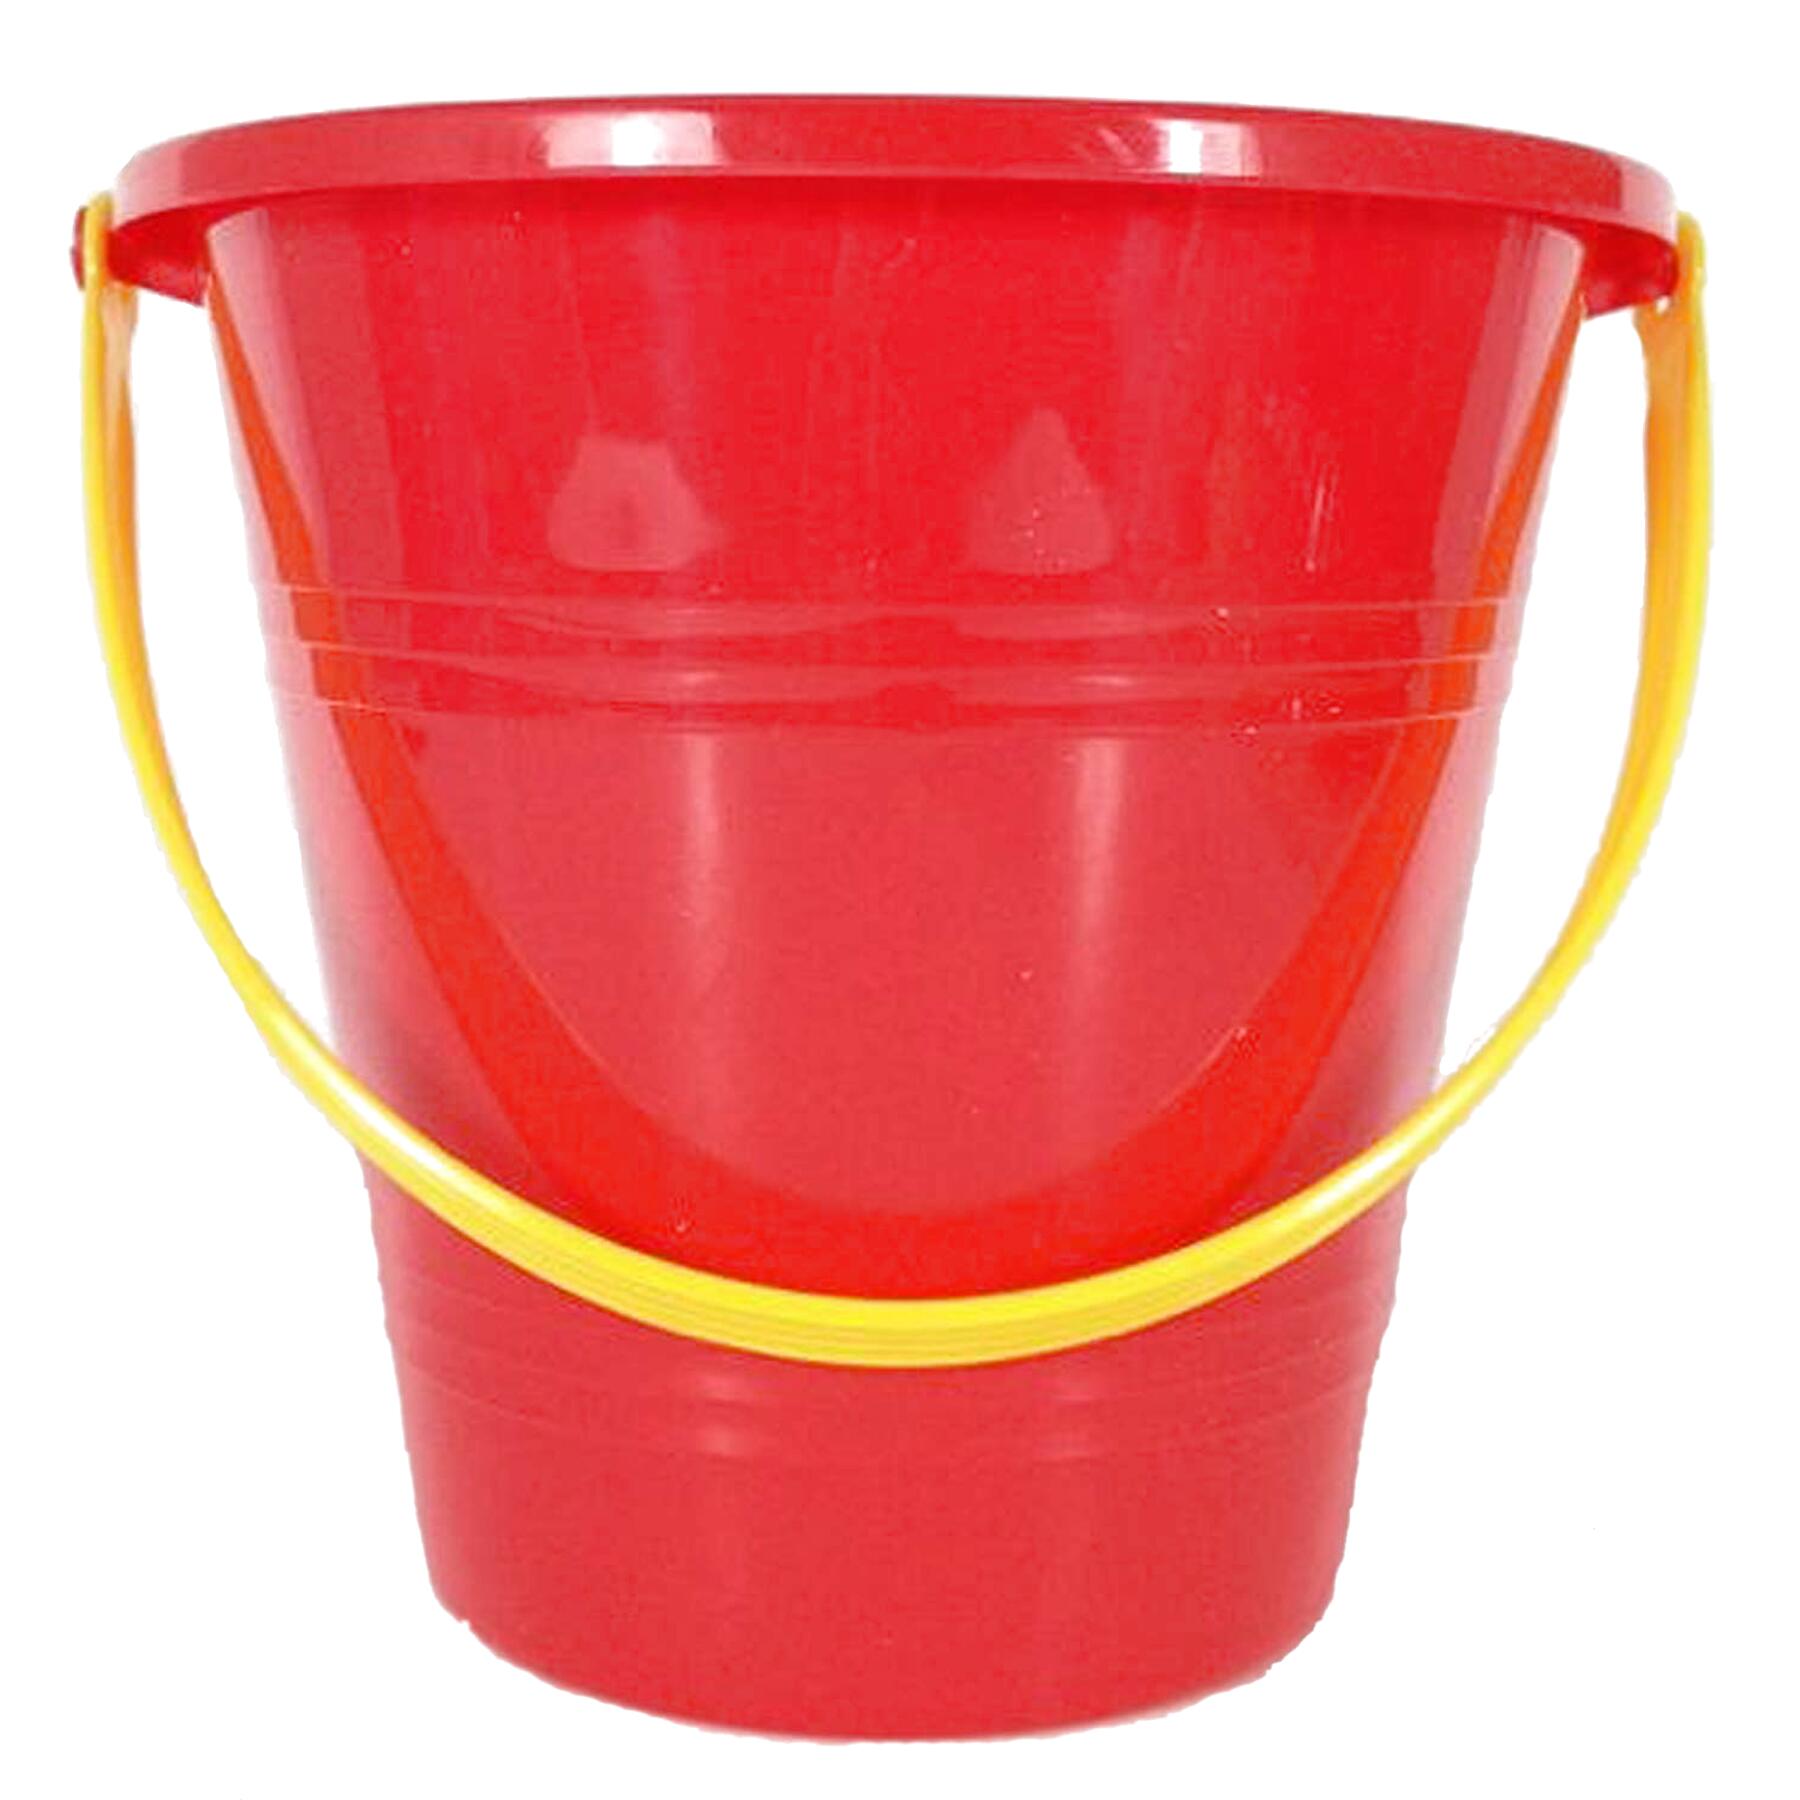 buckets for sale